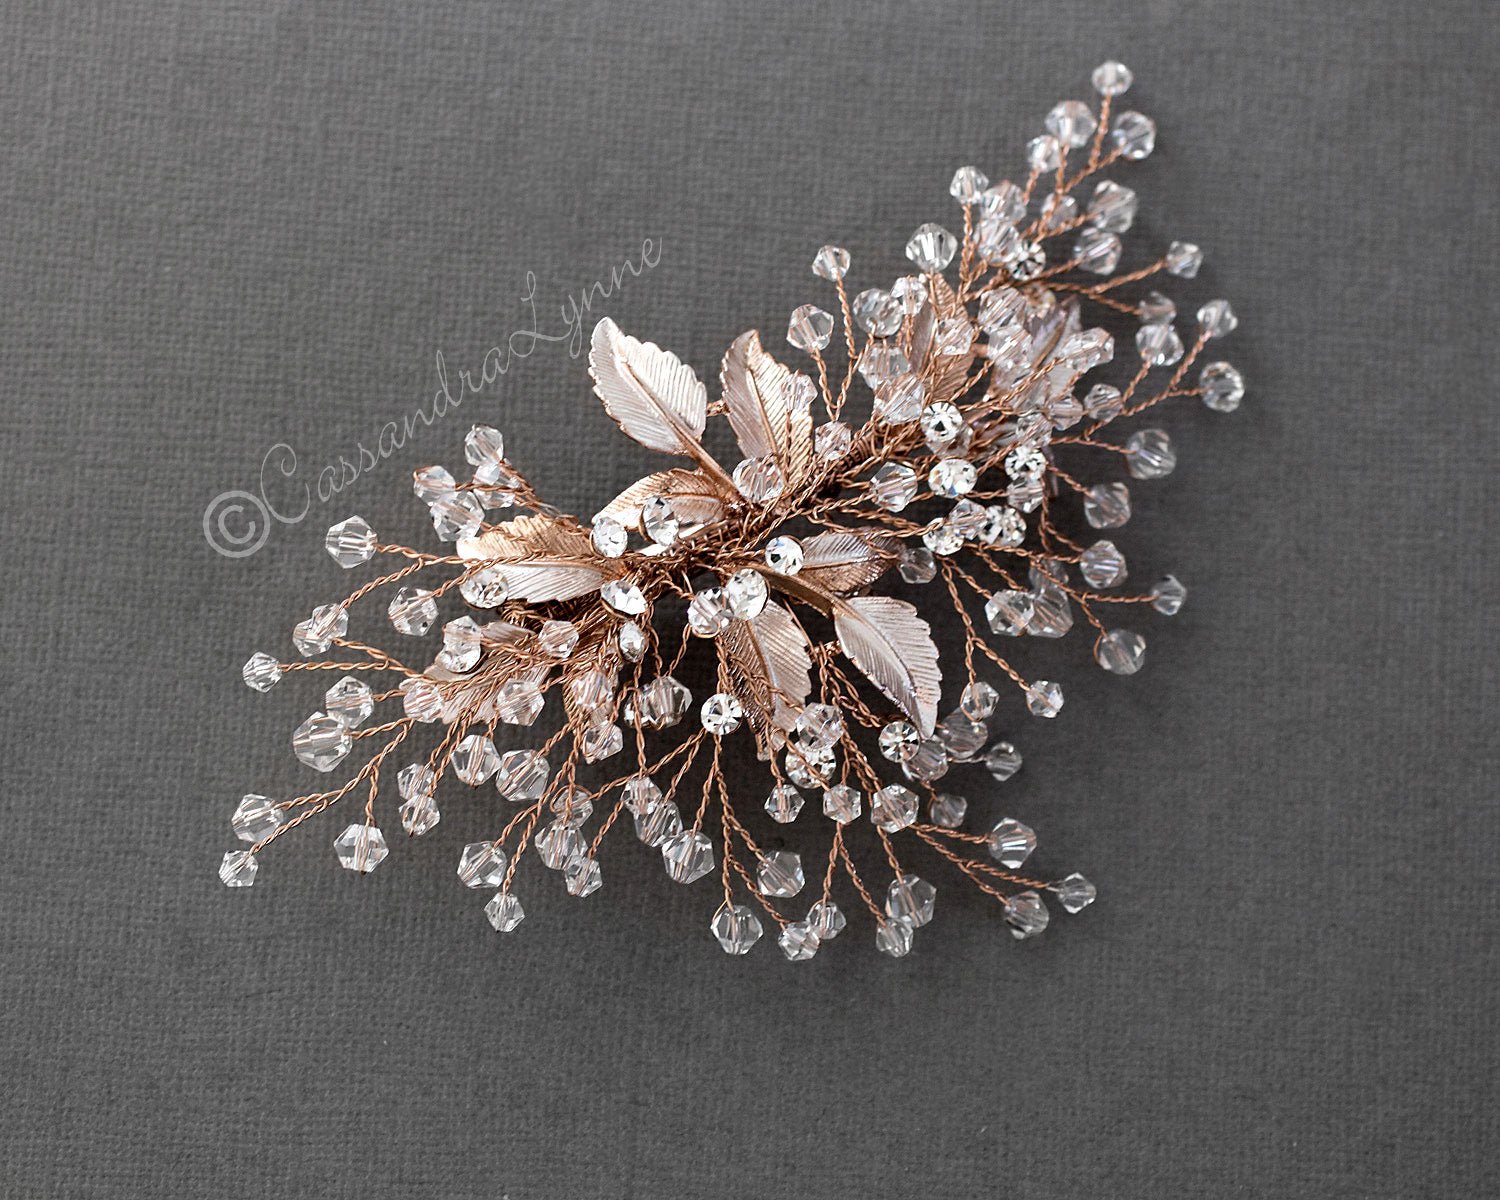 Rose Gold Bridal Hair Piece with Crystals - Cassandra Lynne